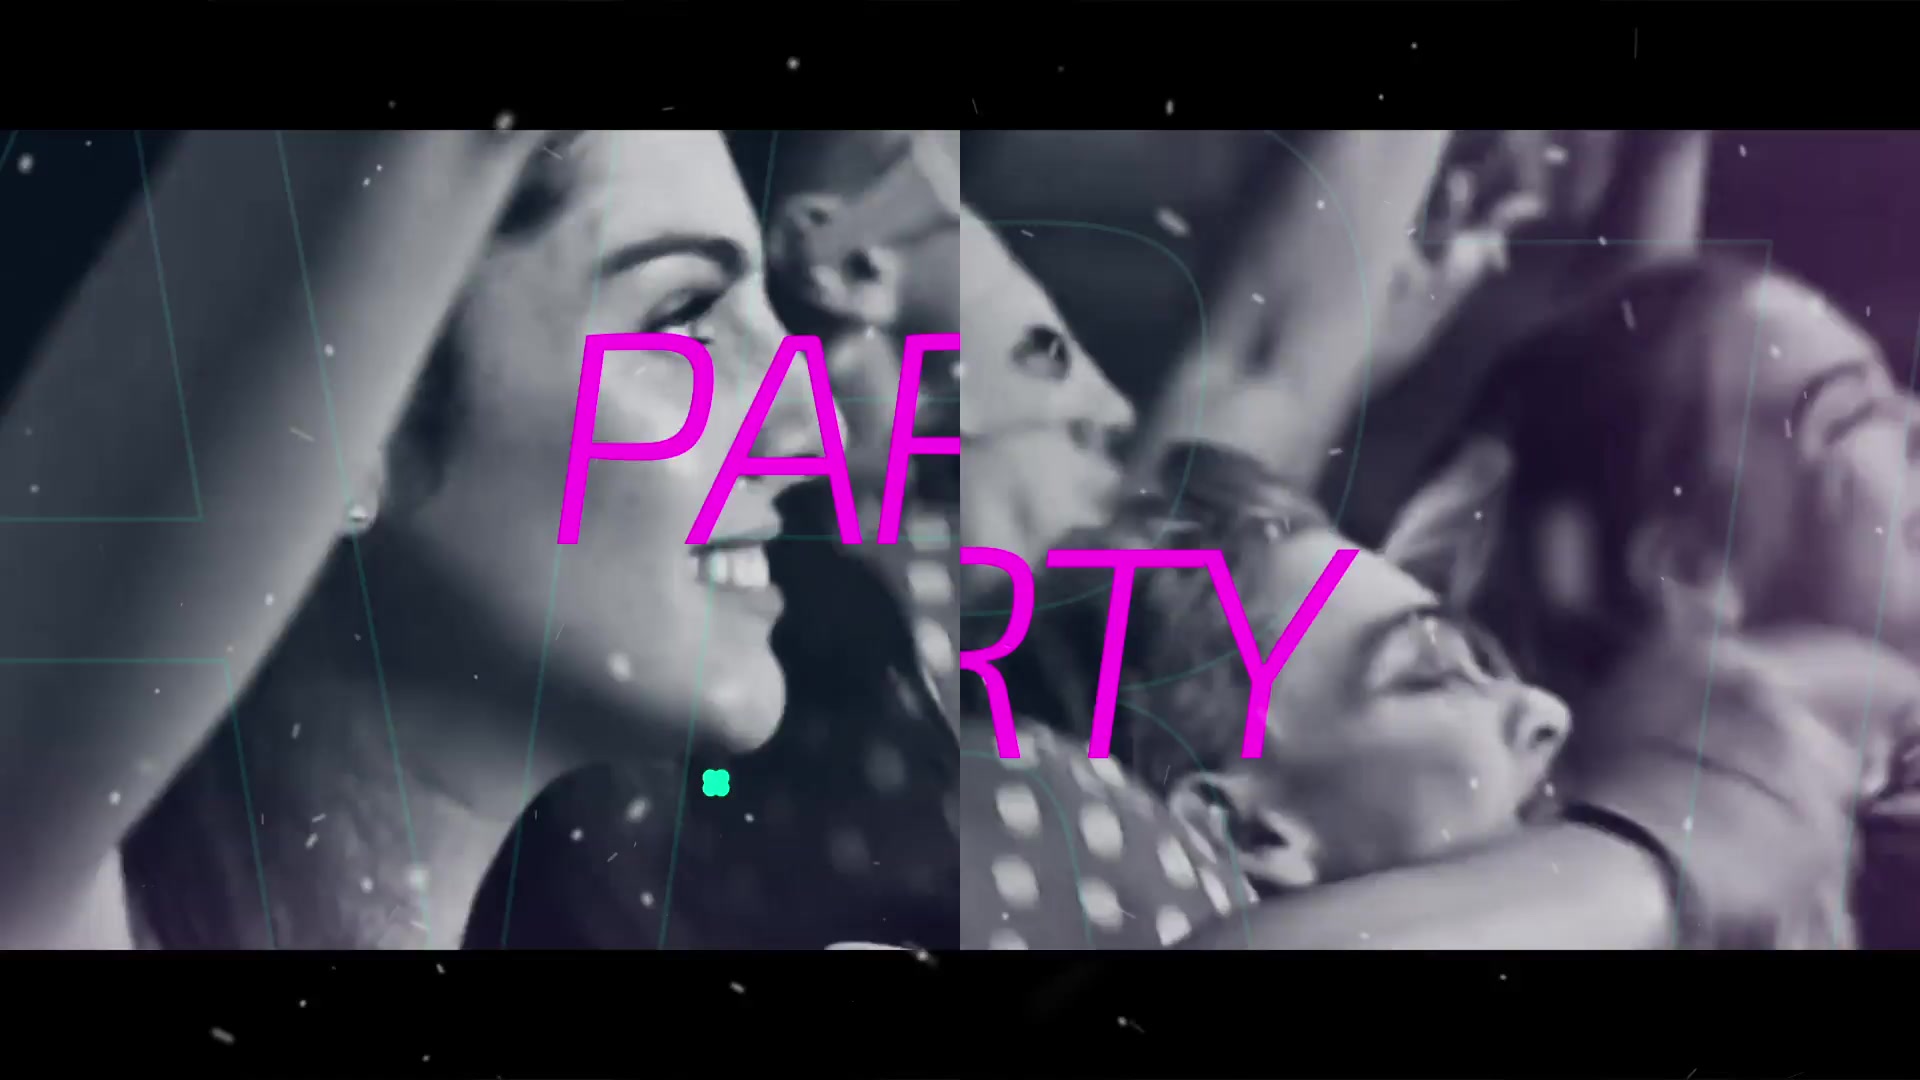 Club Party Event - Download Videohive 23036408